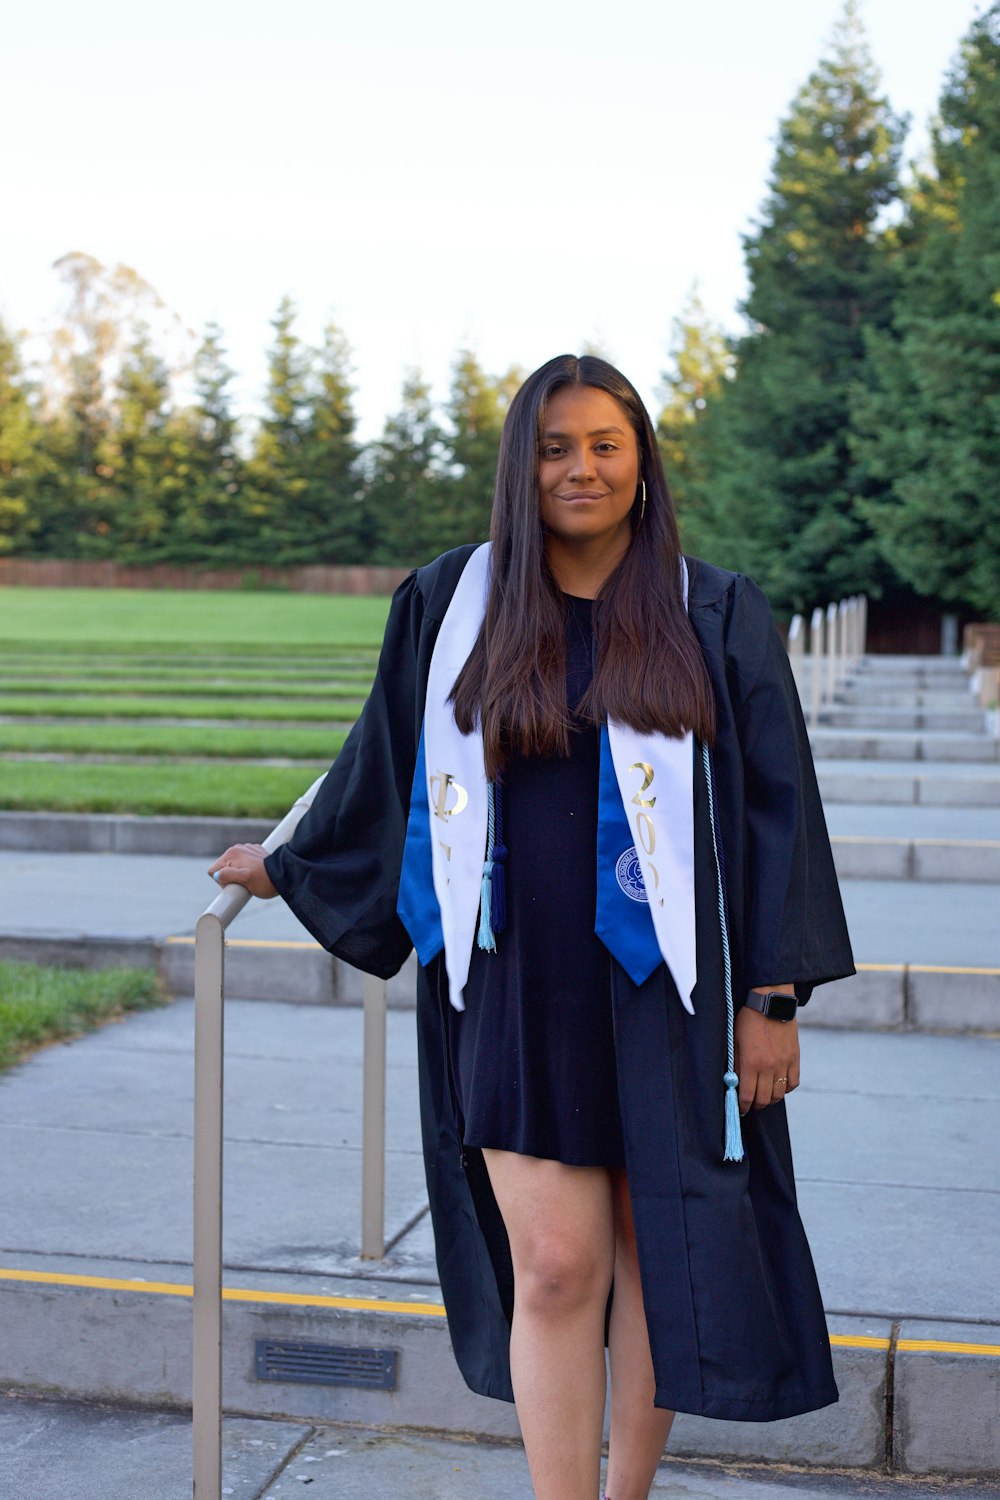 a woman in a graduation gown standing on steps